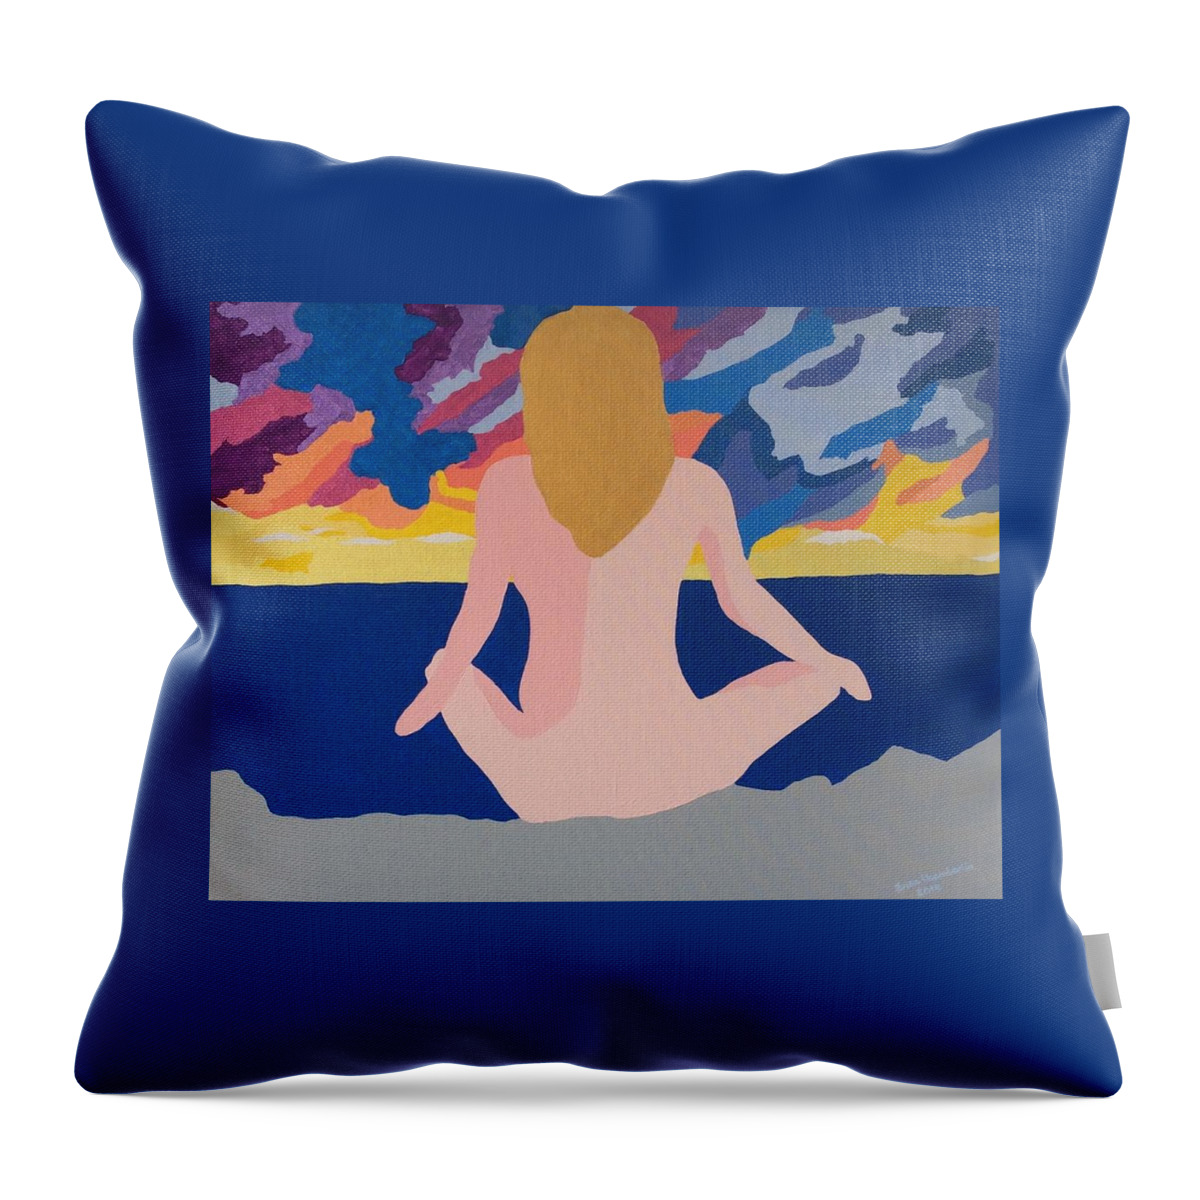 Solitude Throw Pillow featuring the painting Solitude by Erika Jean Chamberlin